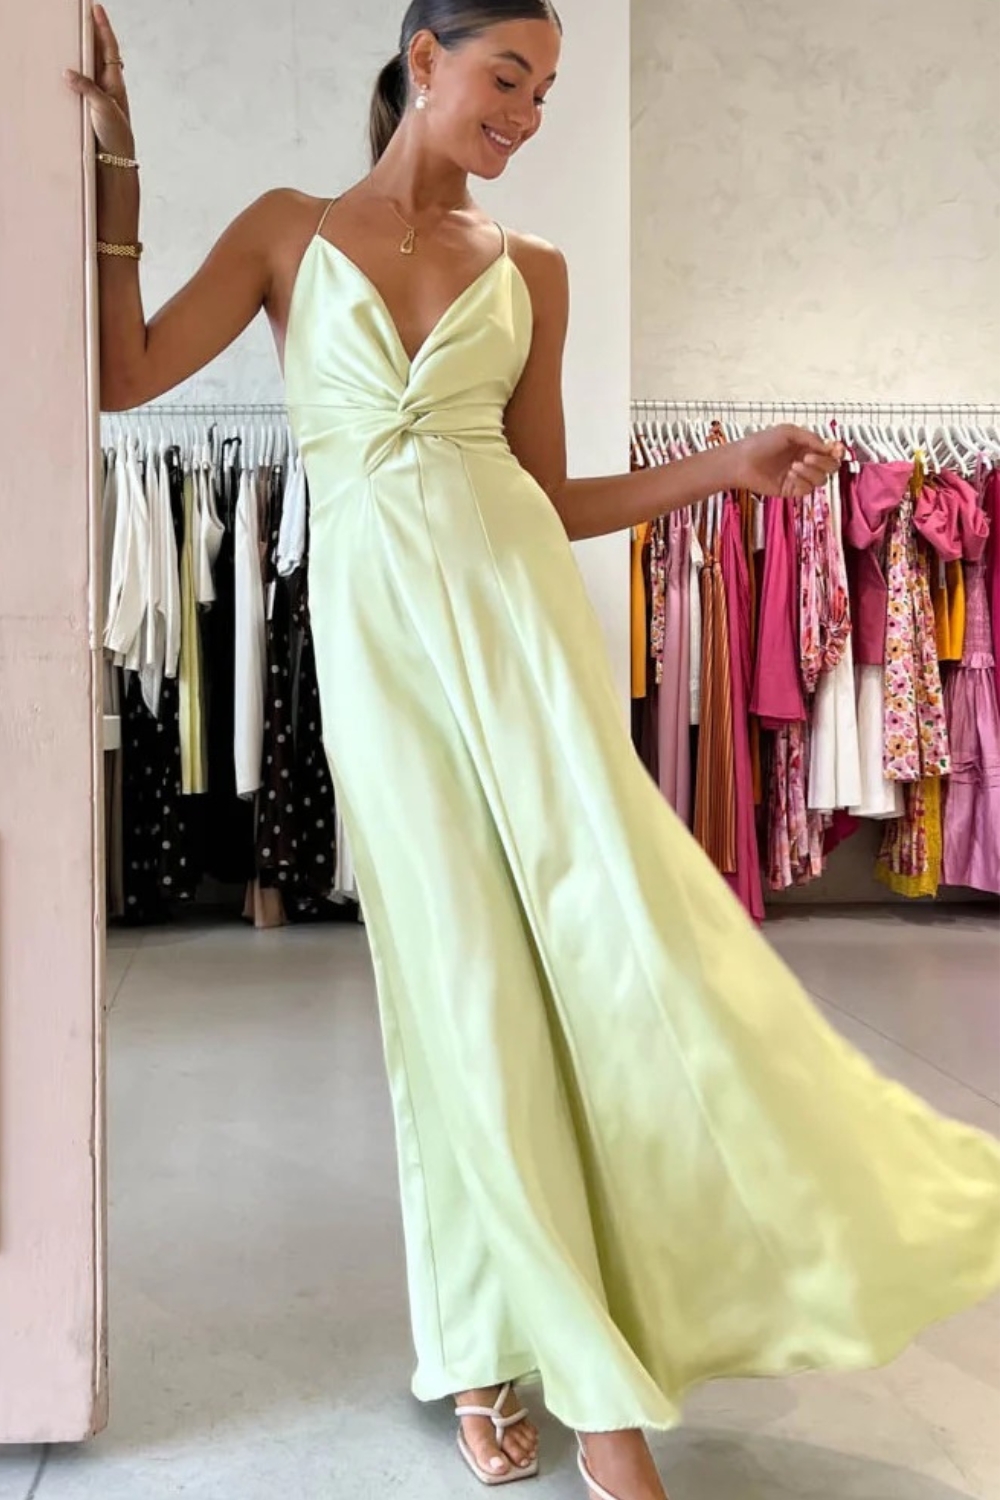 One Fell Swoop Emmeline Maxi Dress in Limoncello.